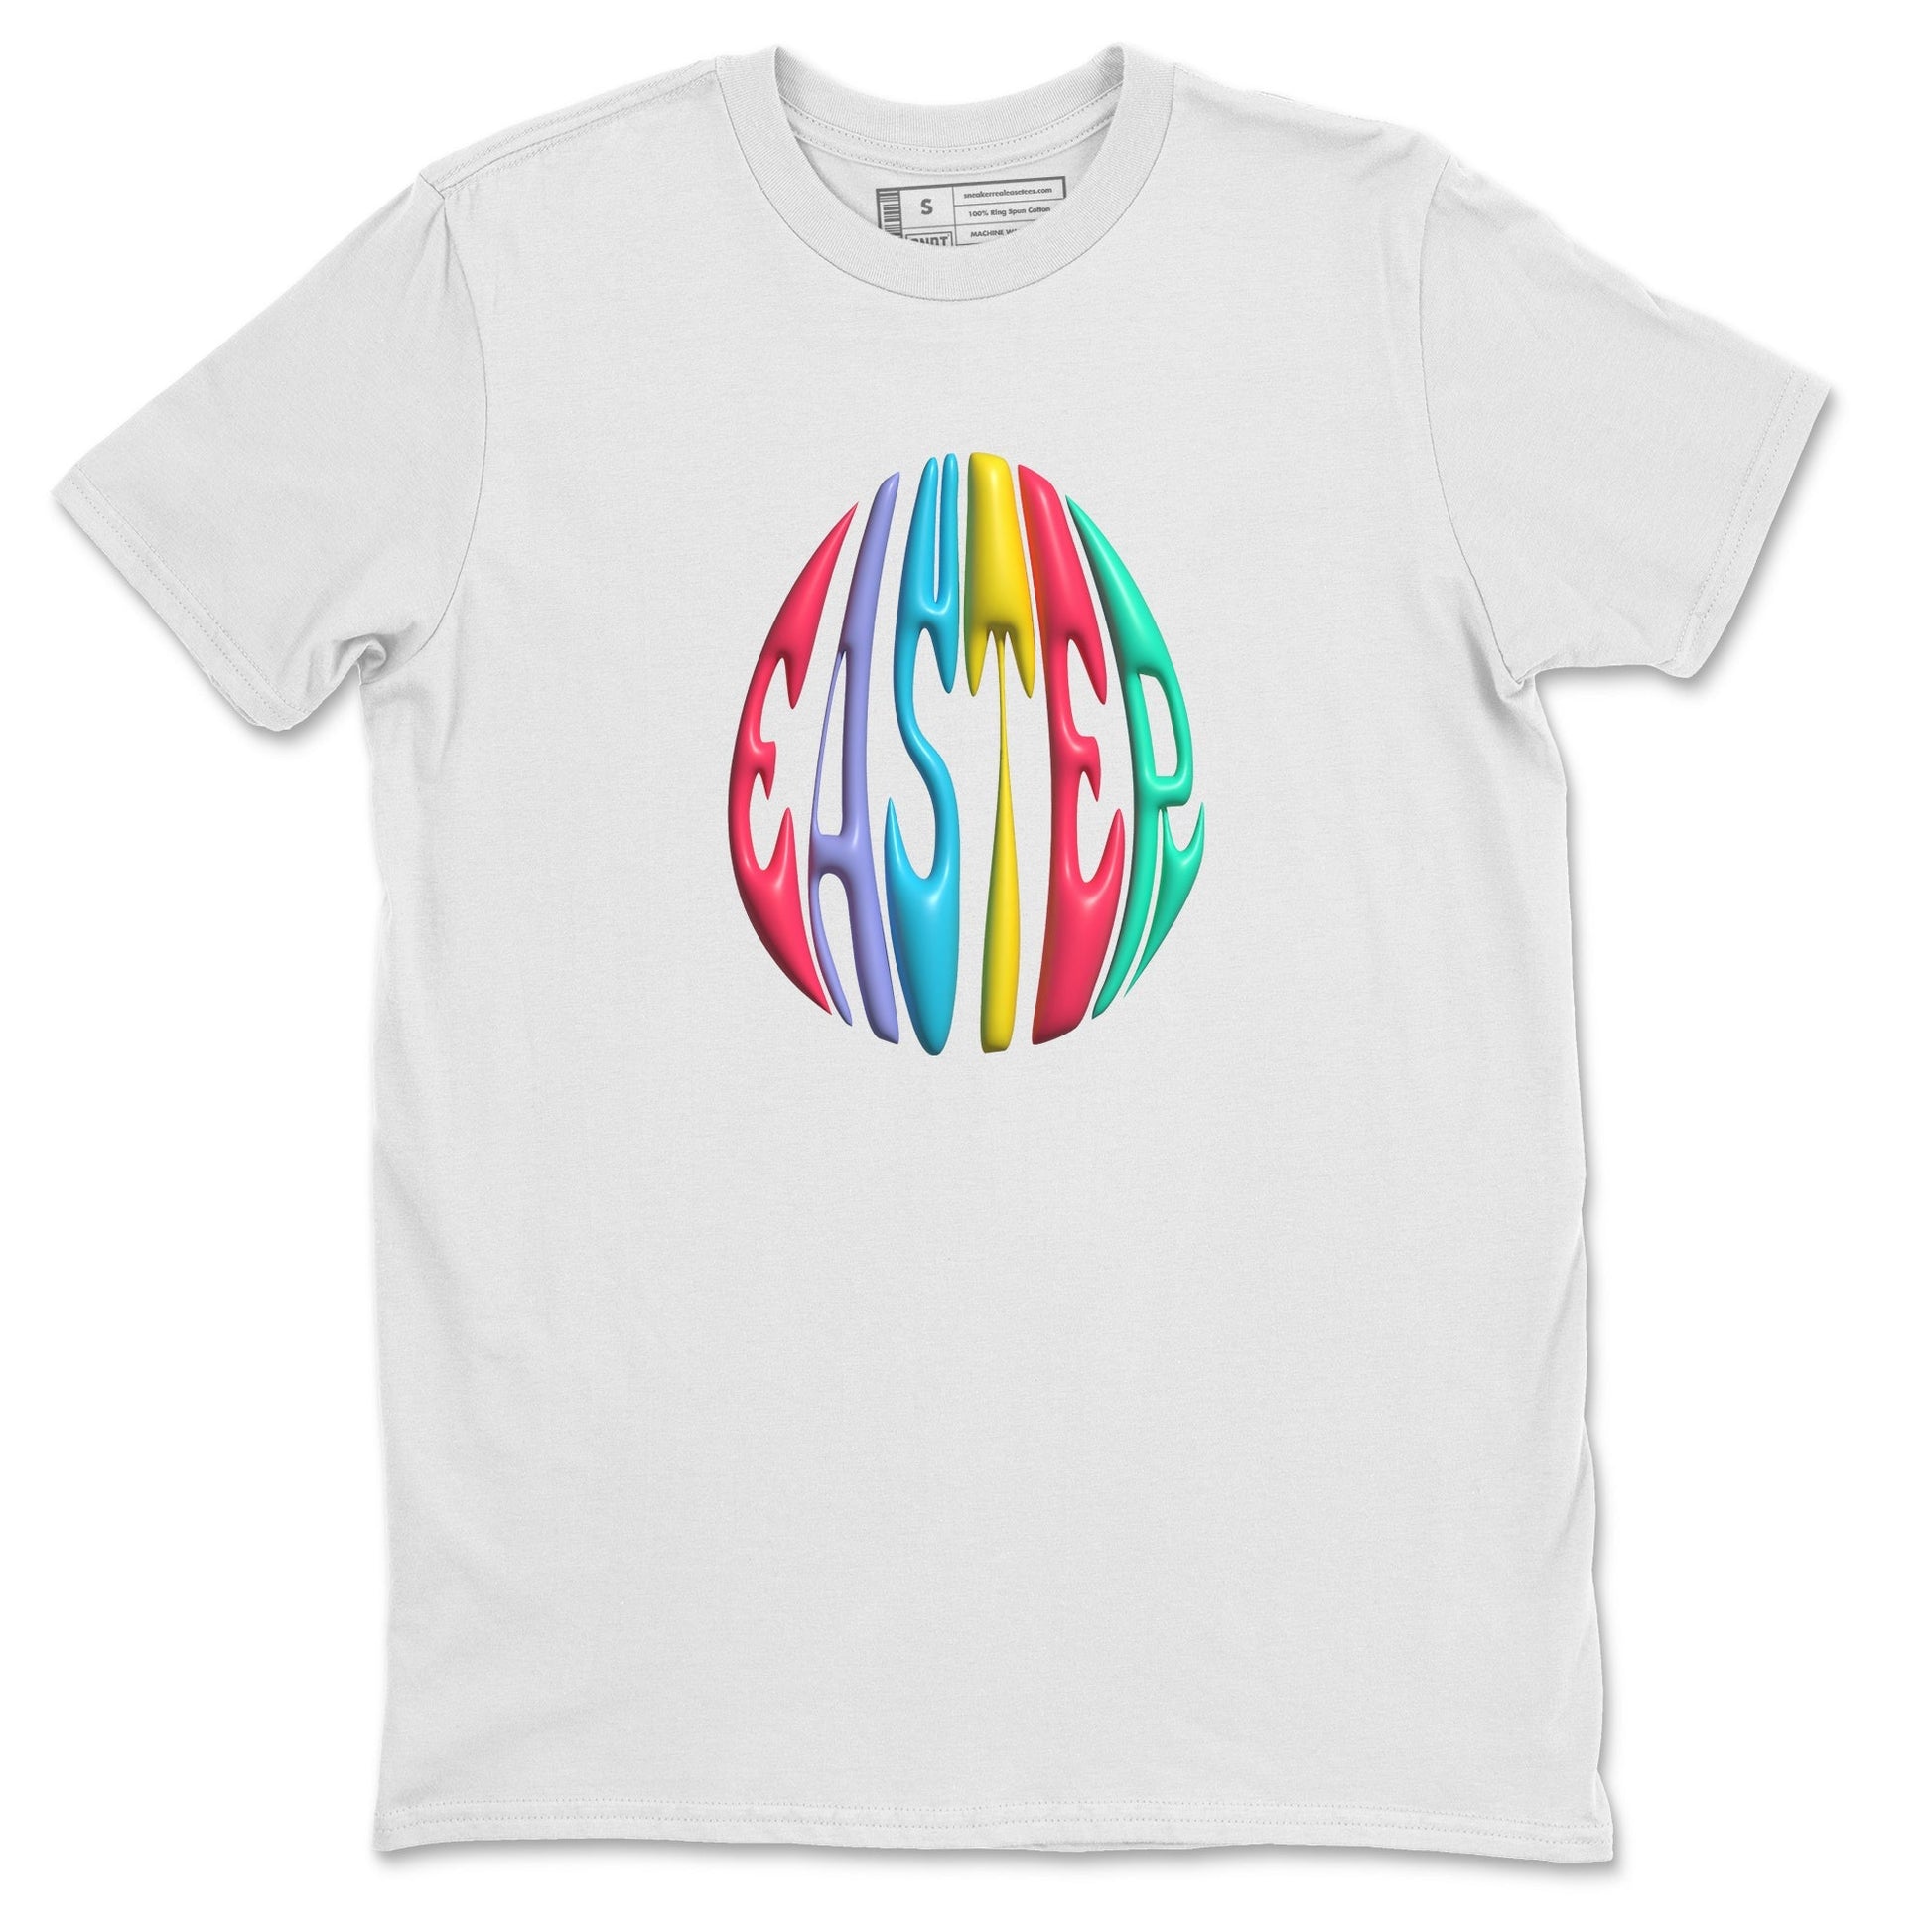 Dunk Easter Candy Sneaker Tees Drip Gear Zone 3D Easter Typo Sneaker Tees Nike Easter Shirt Unisex Shirts White 2